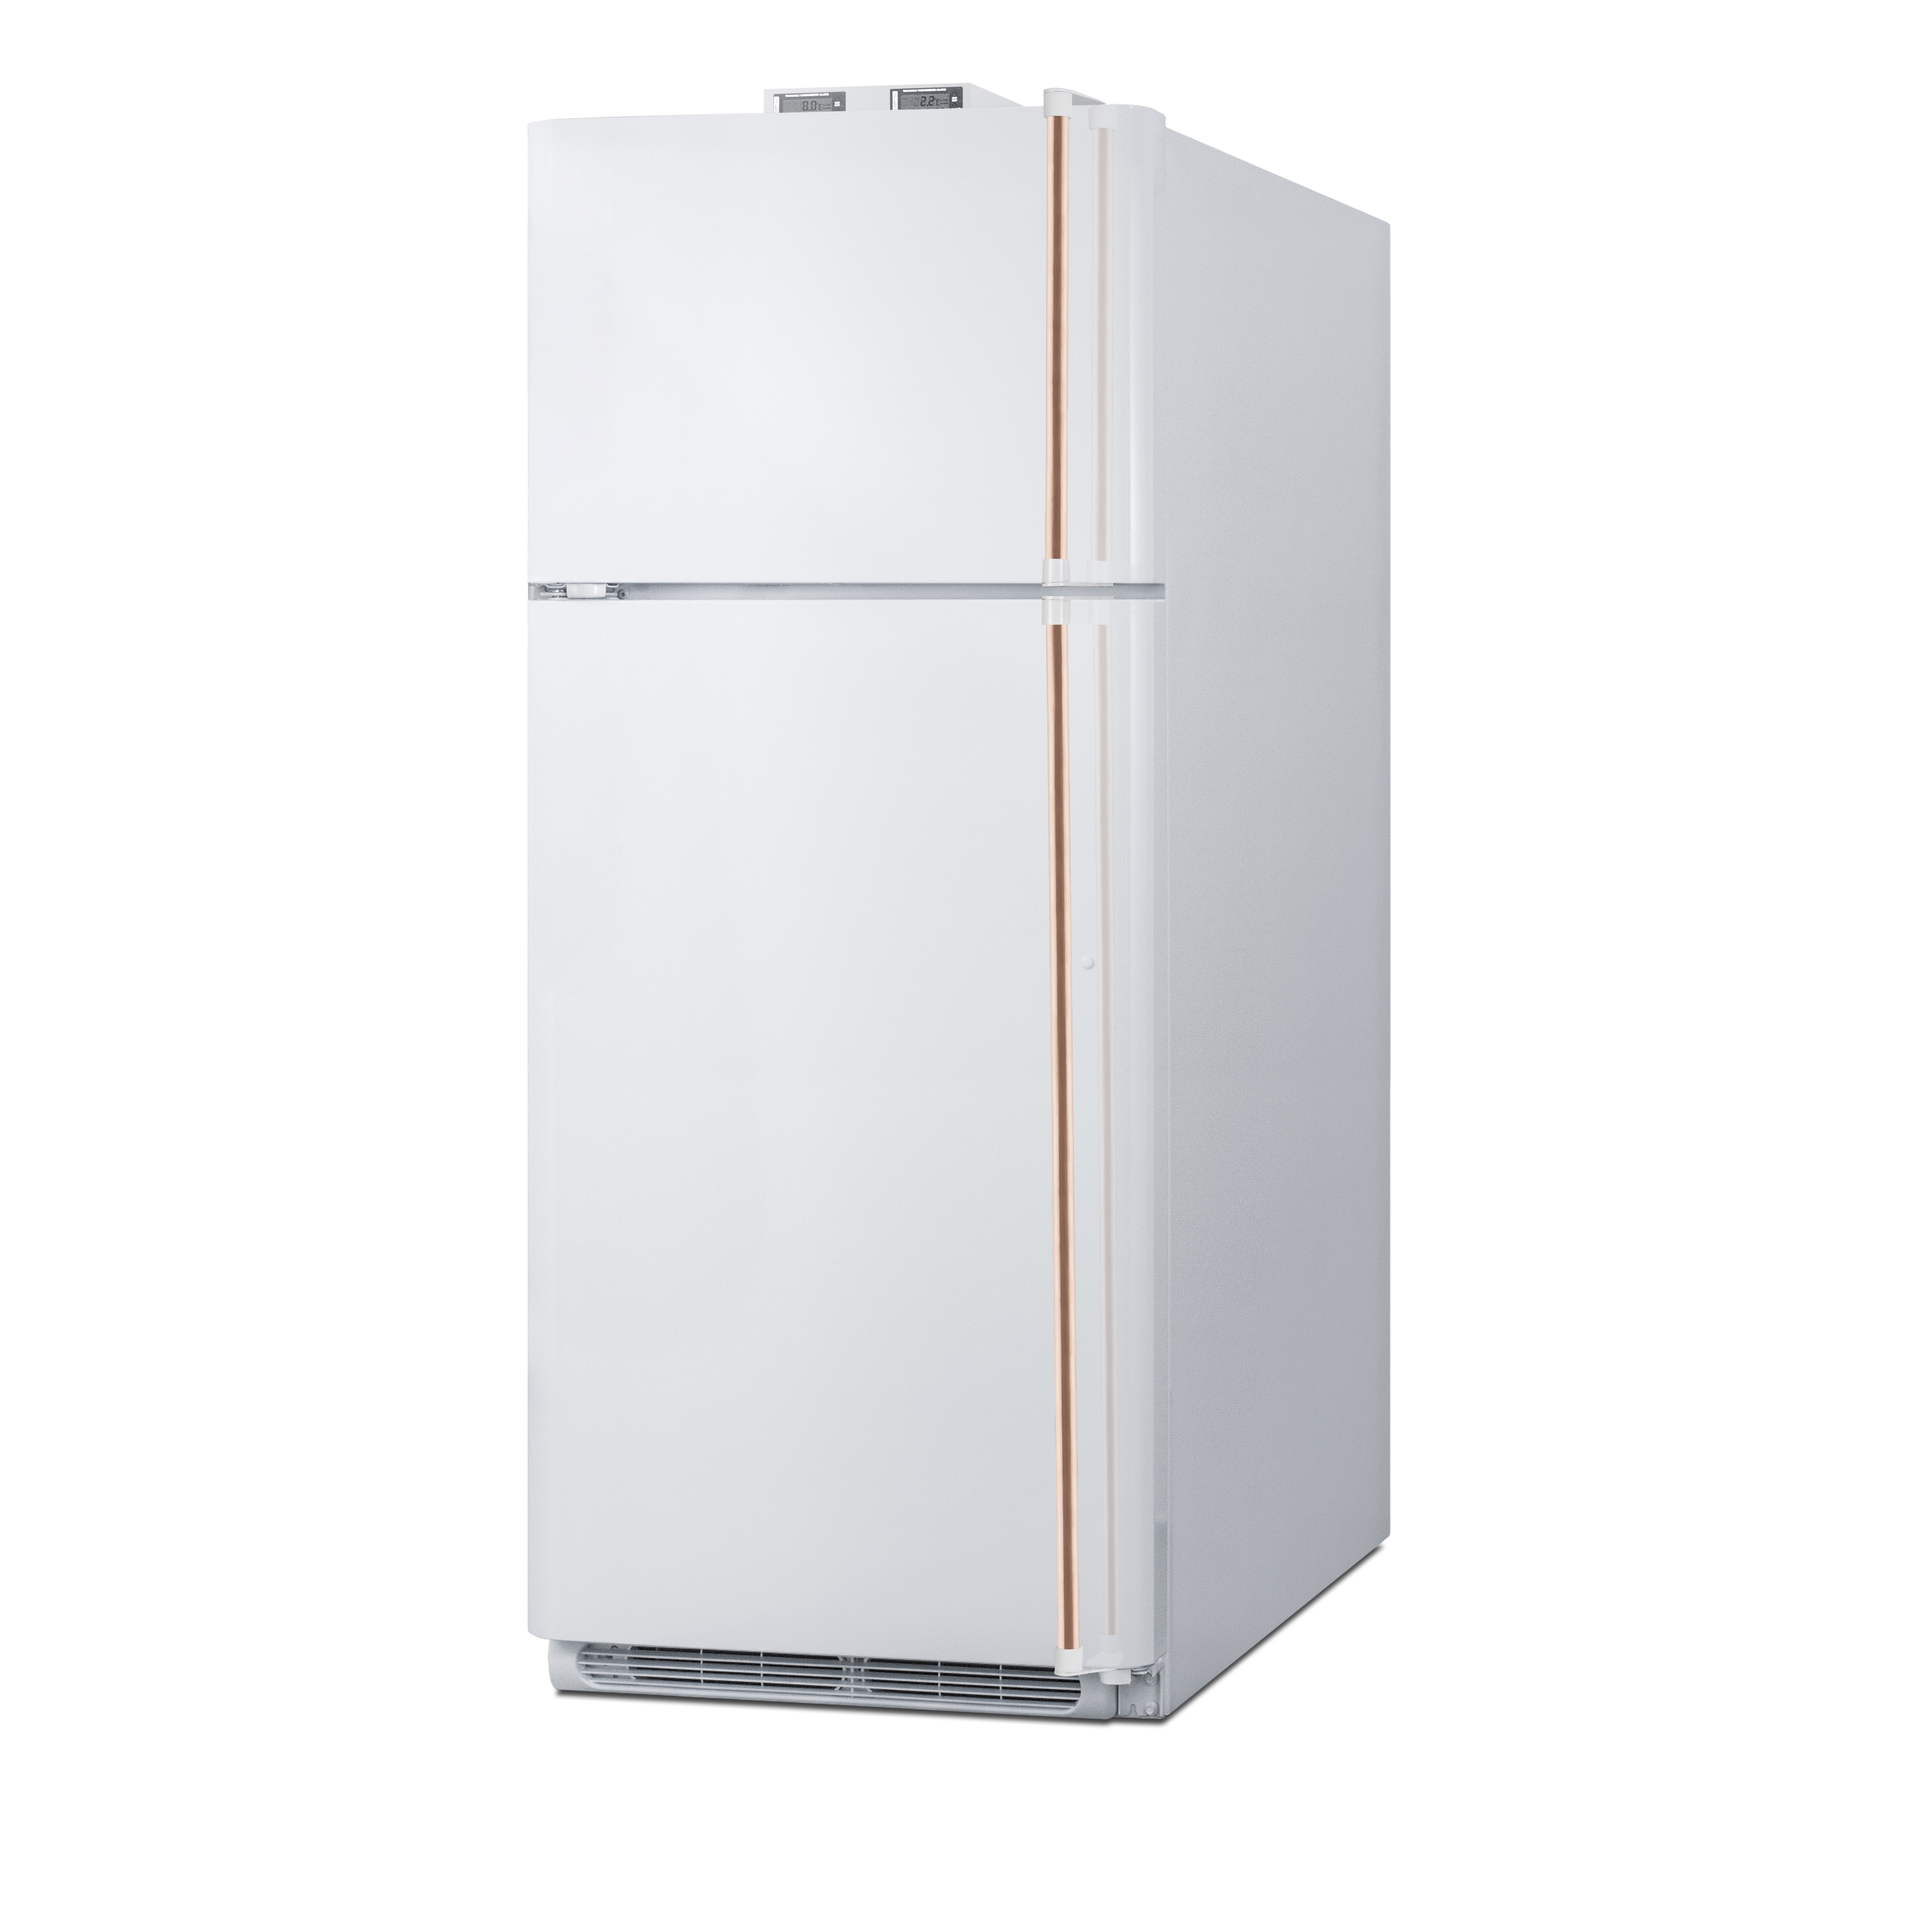 Accucold Refrigerator Freezer Combos